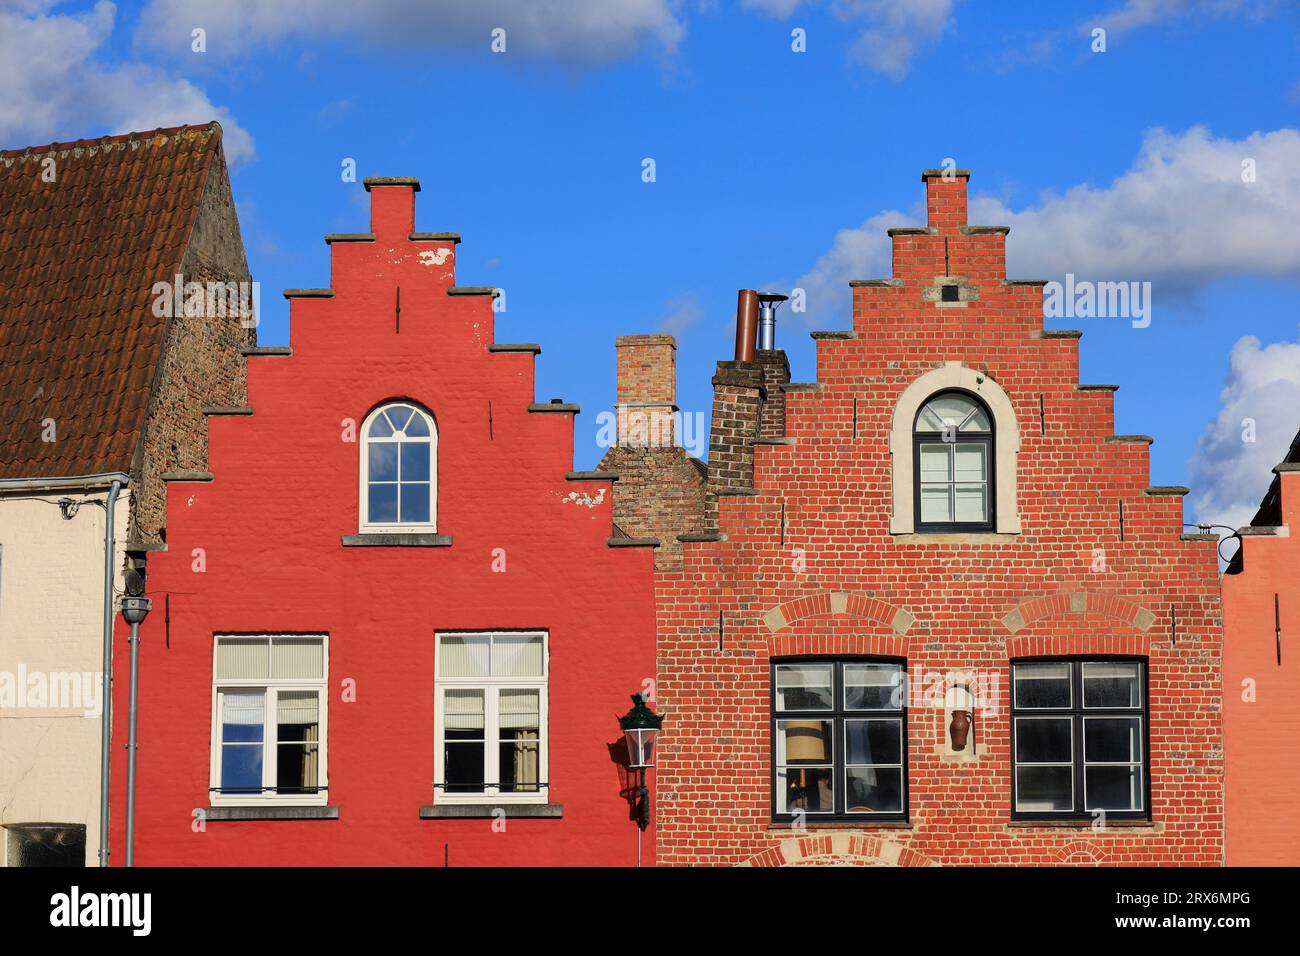 Belgium, West Flanders, Bruges, Facades of historic townhouses Stock Photo